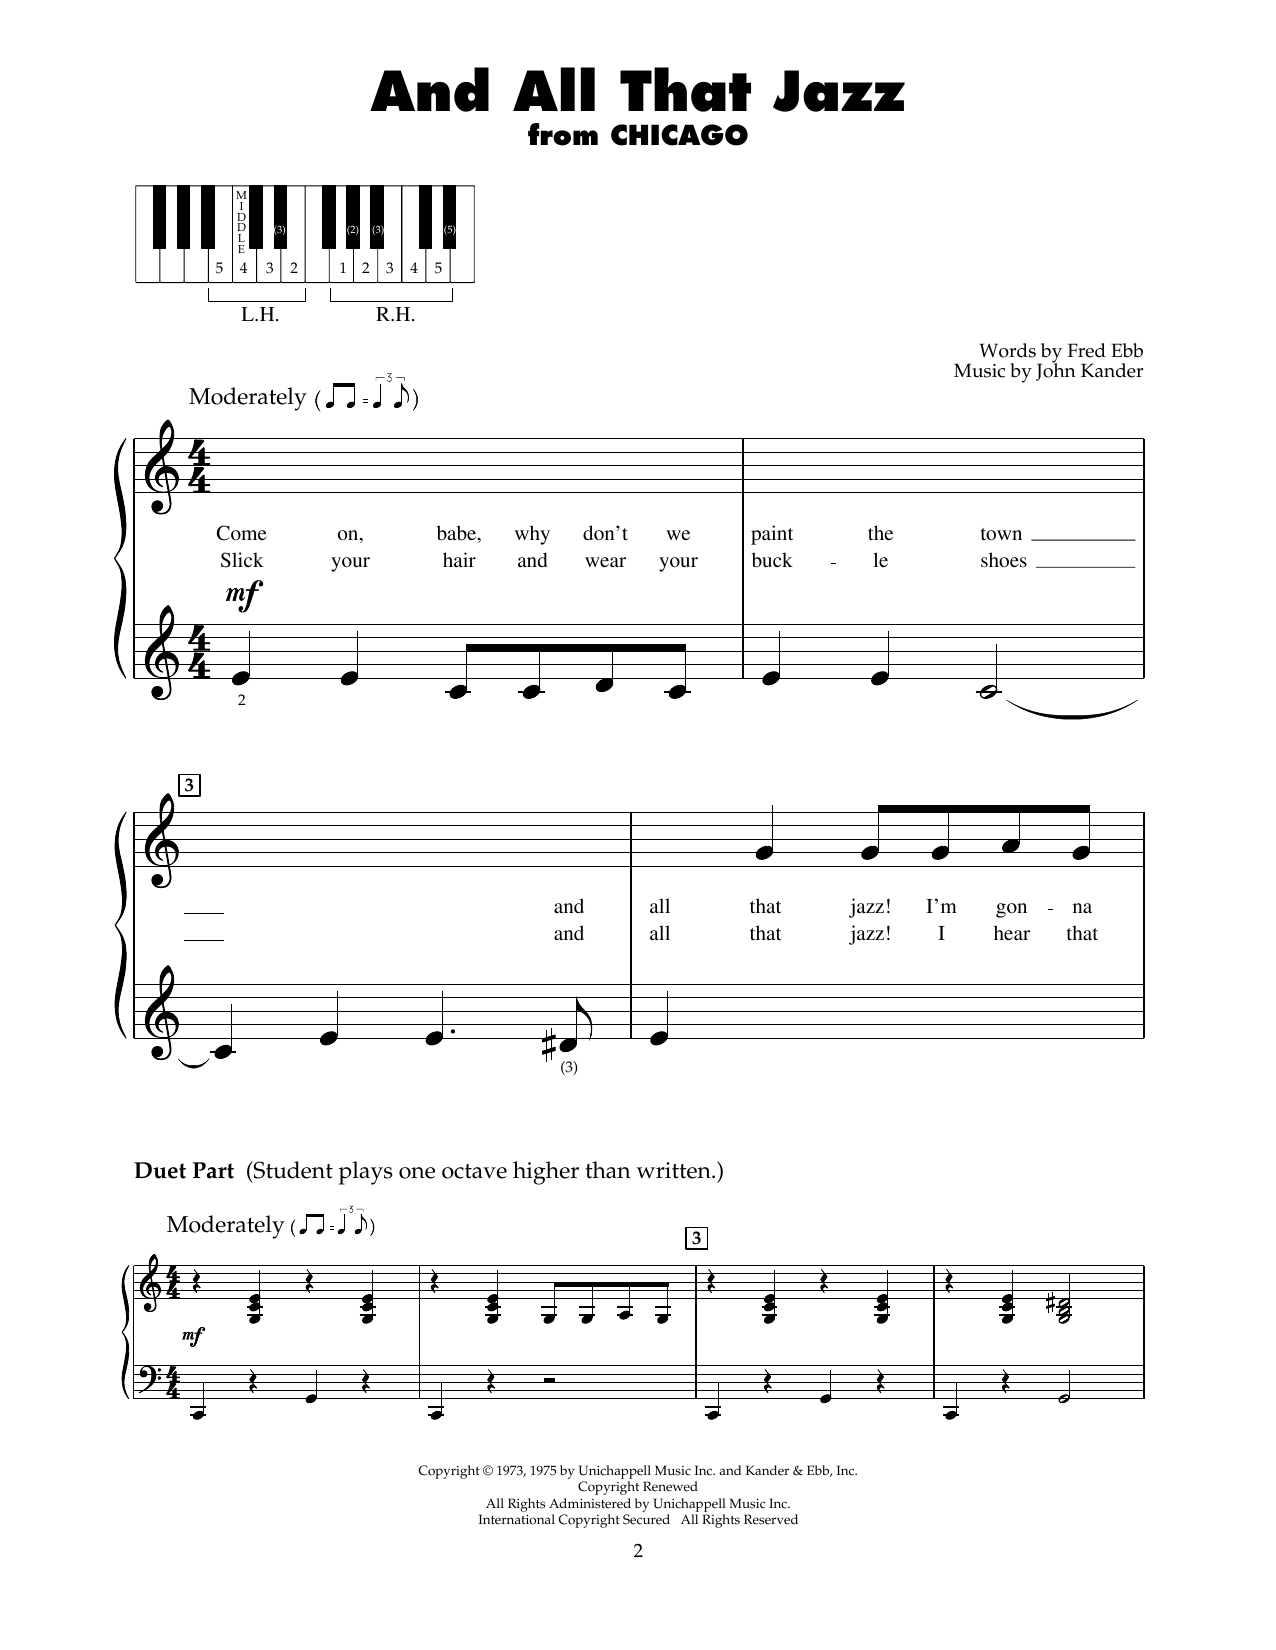 Download Kander & Ebb And All That Jazz (from Chicago) Sheet Music